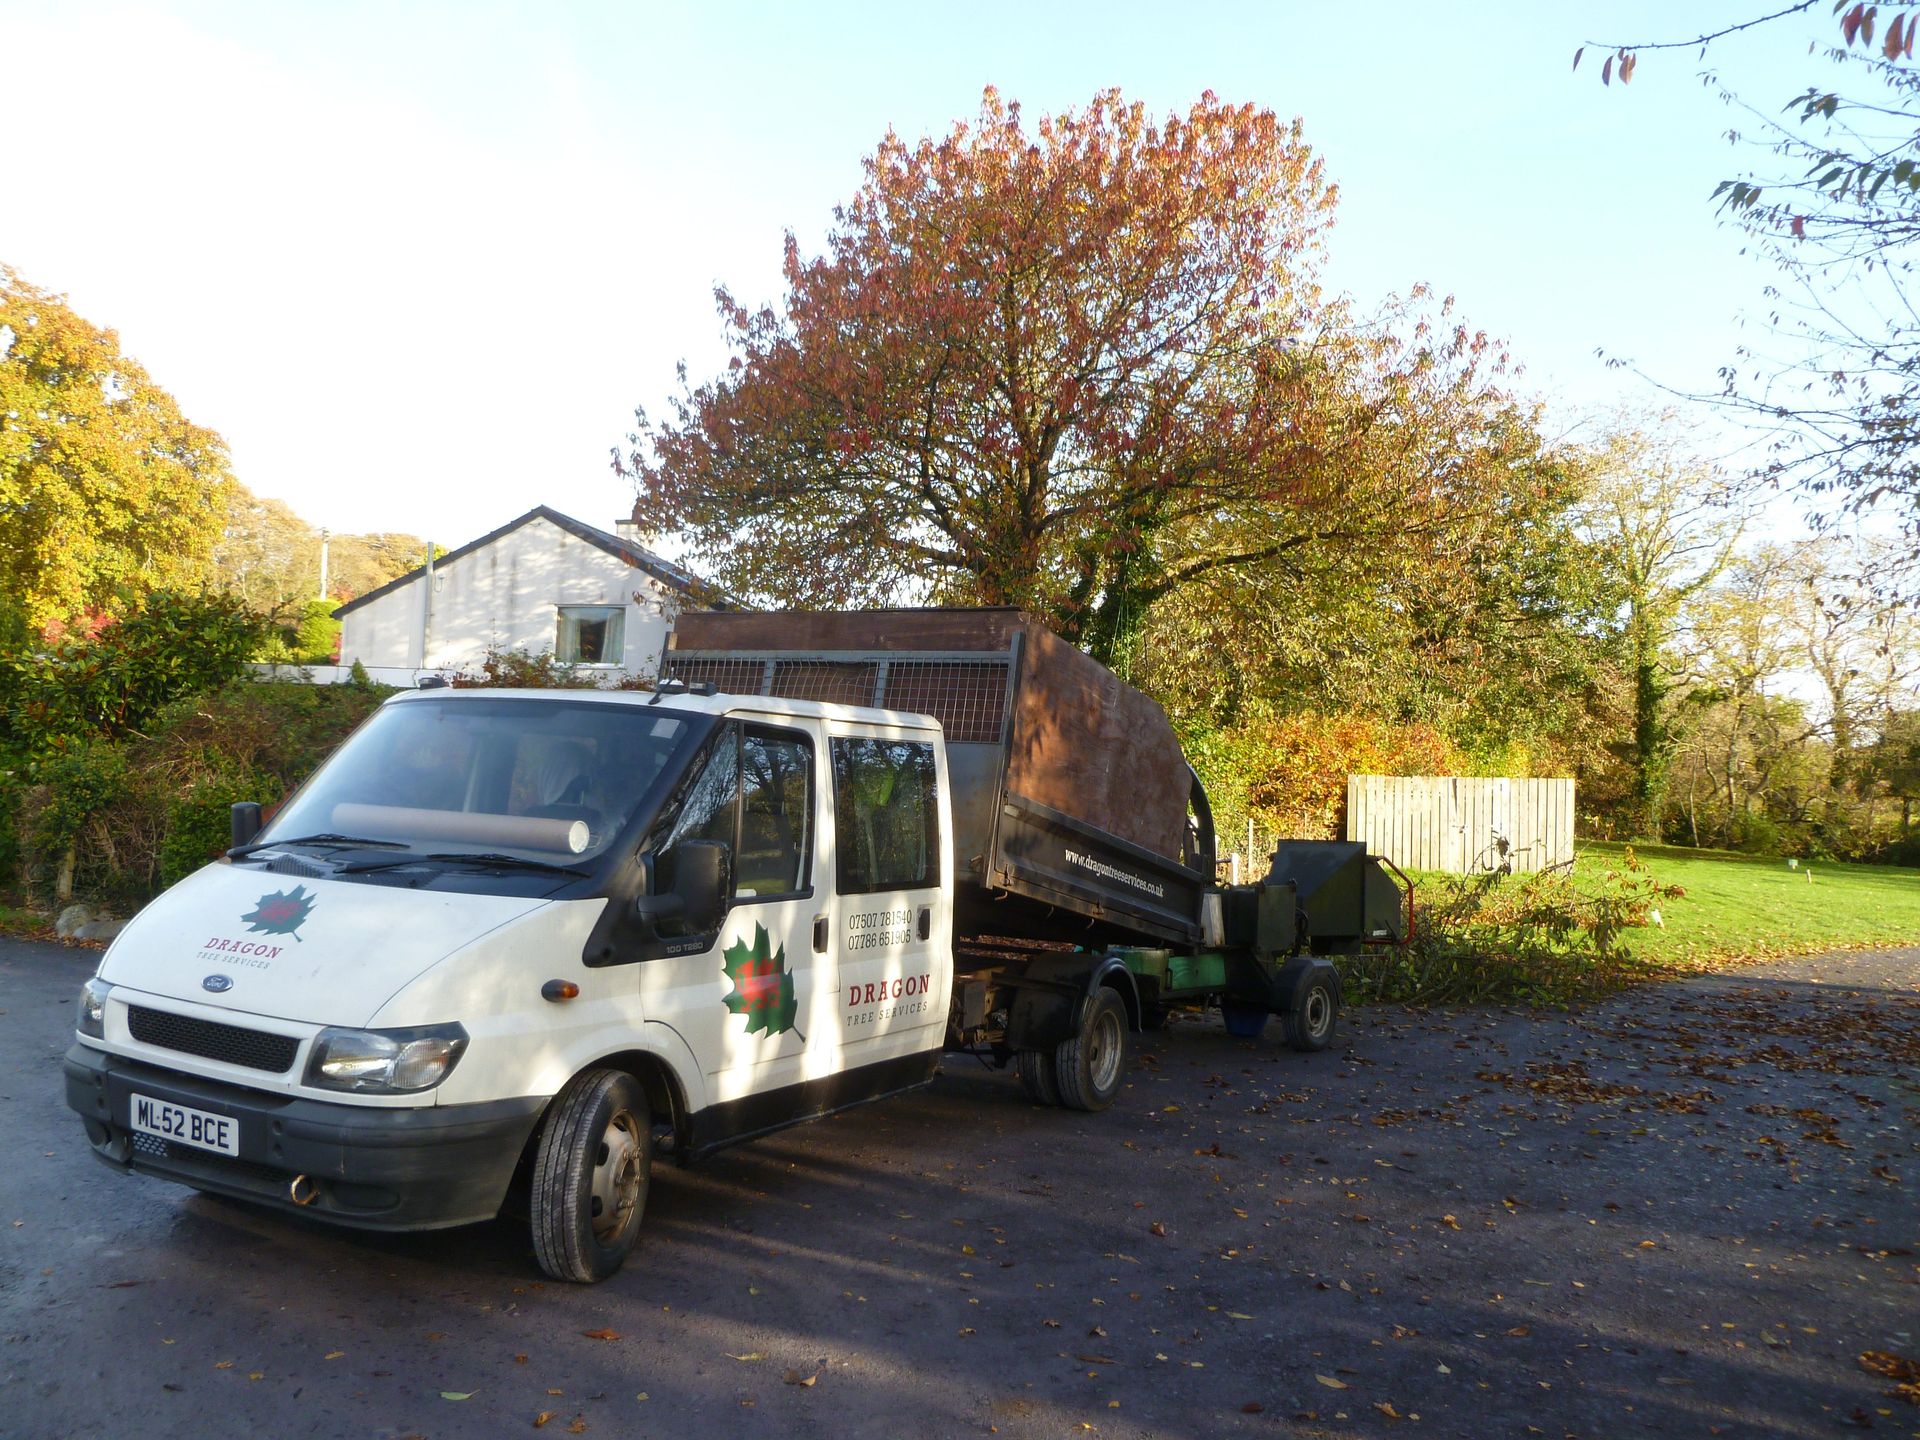 Setting up before beginning the Cherry Tree Crown Reduction. The Dragon Tree Services van now complete with go faster stripes along the sills.